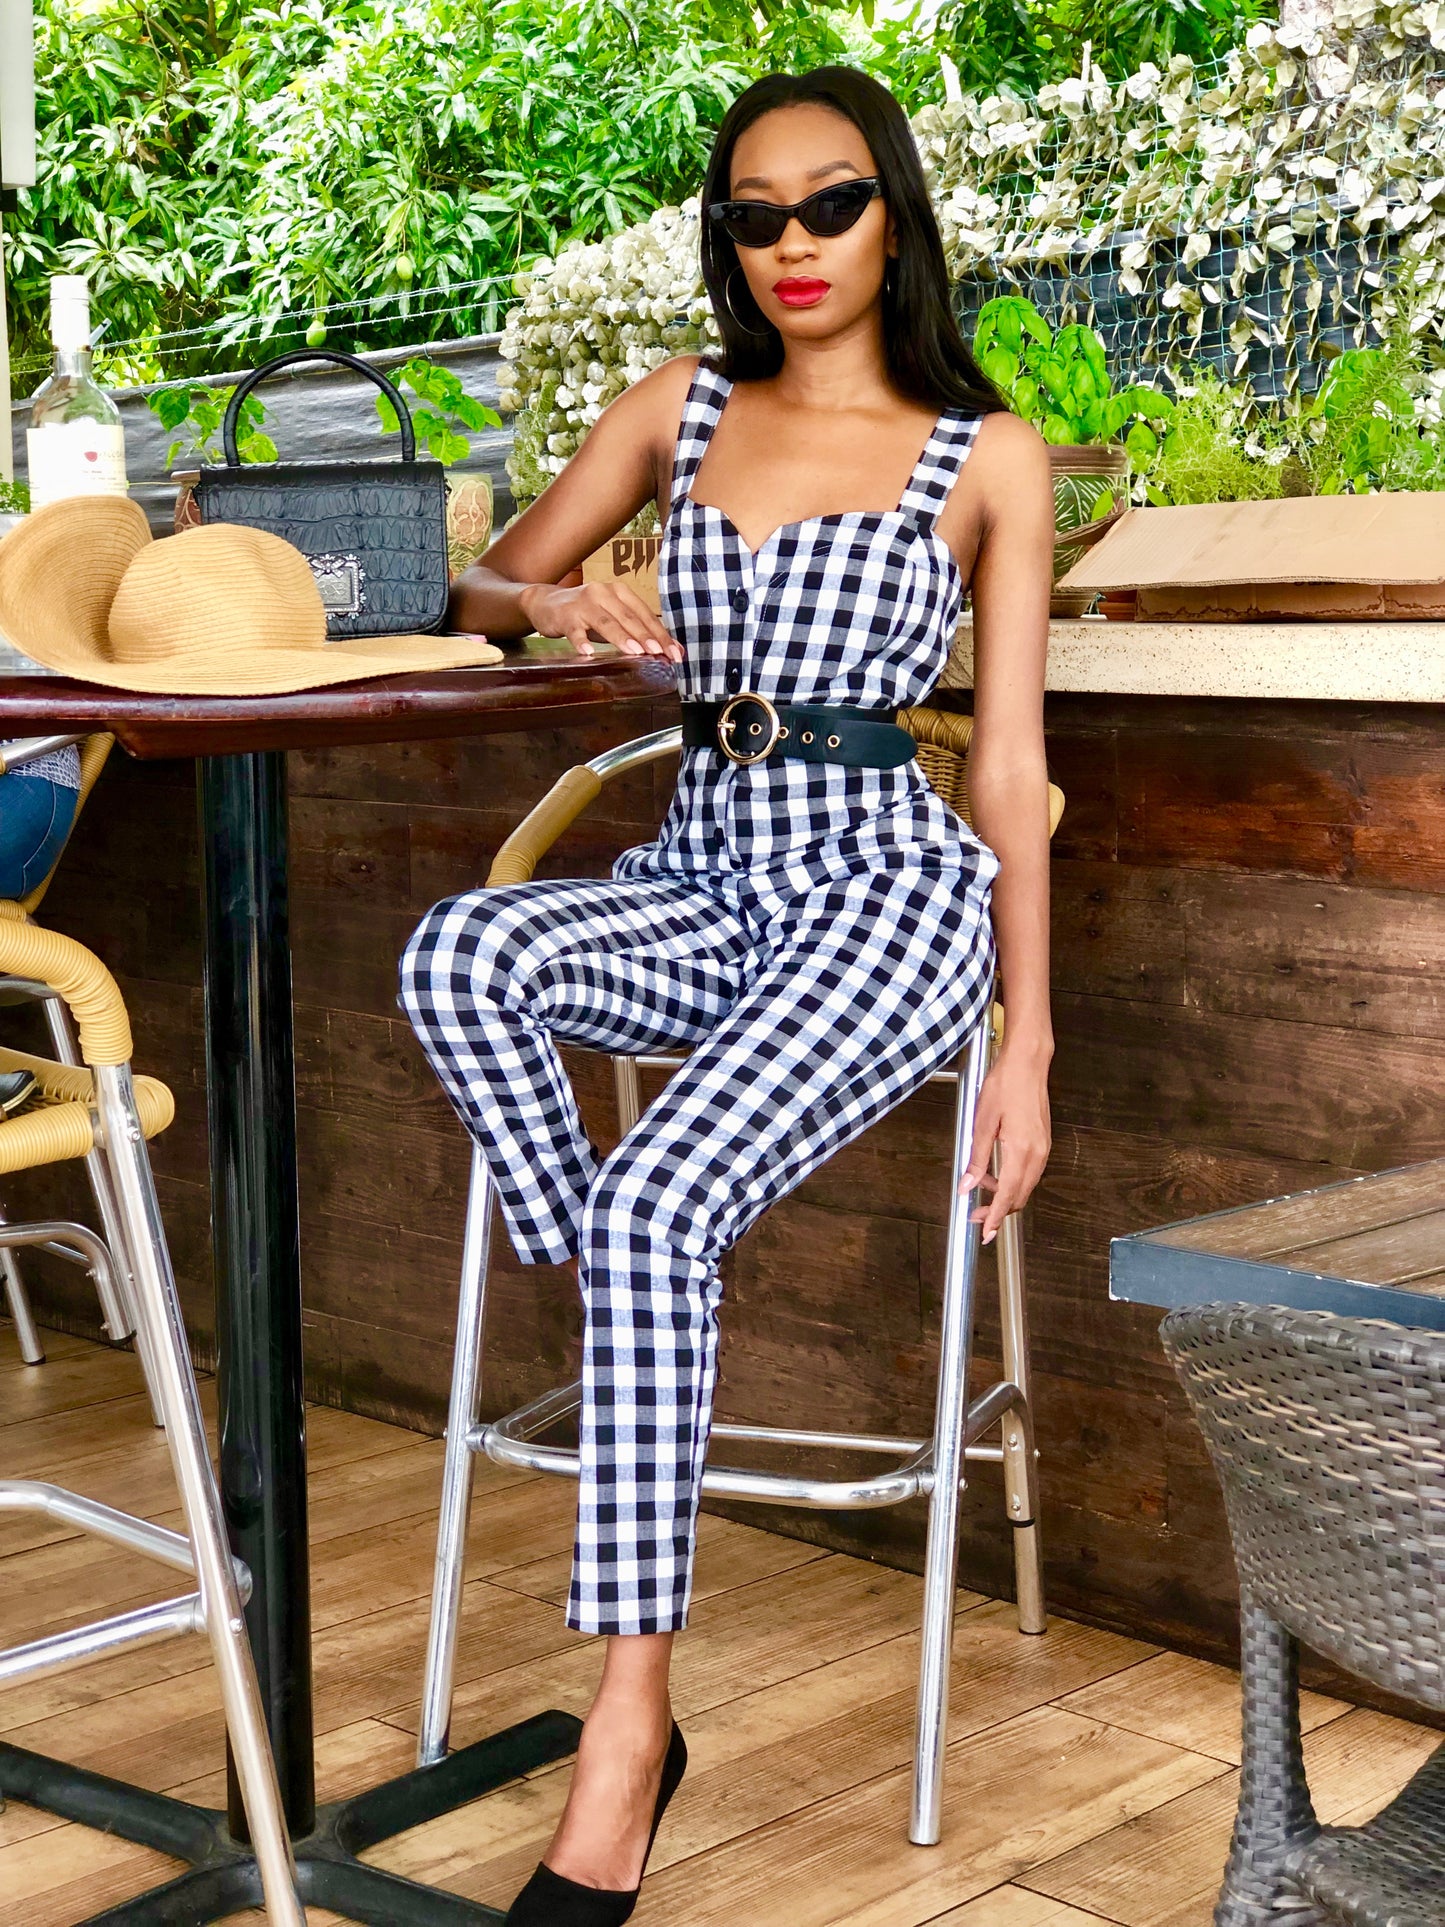 Checkered Jumpsuit